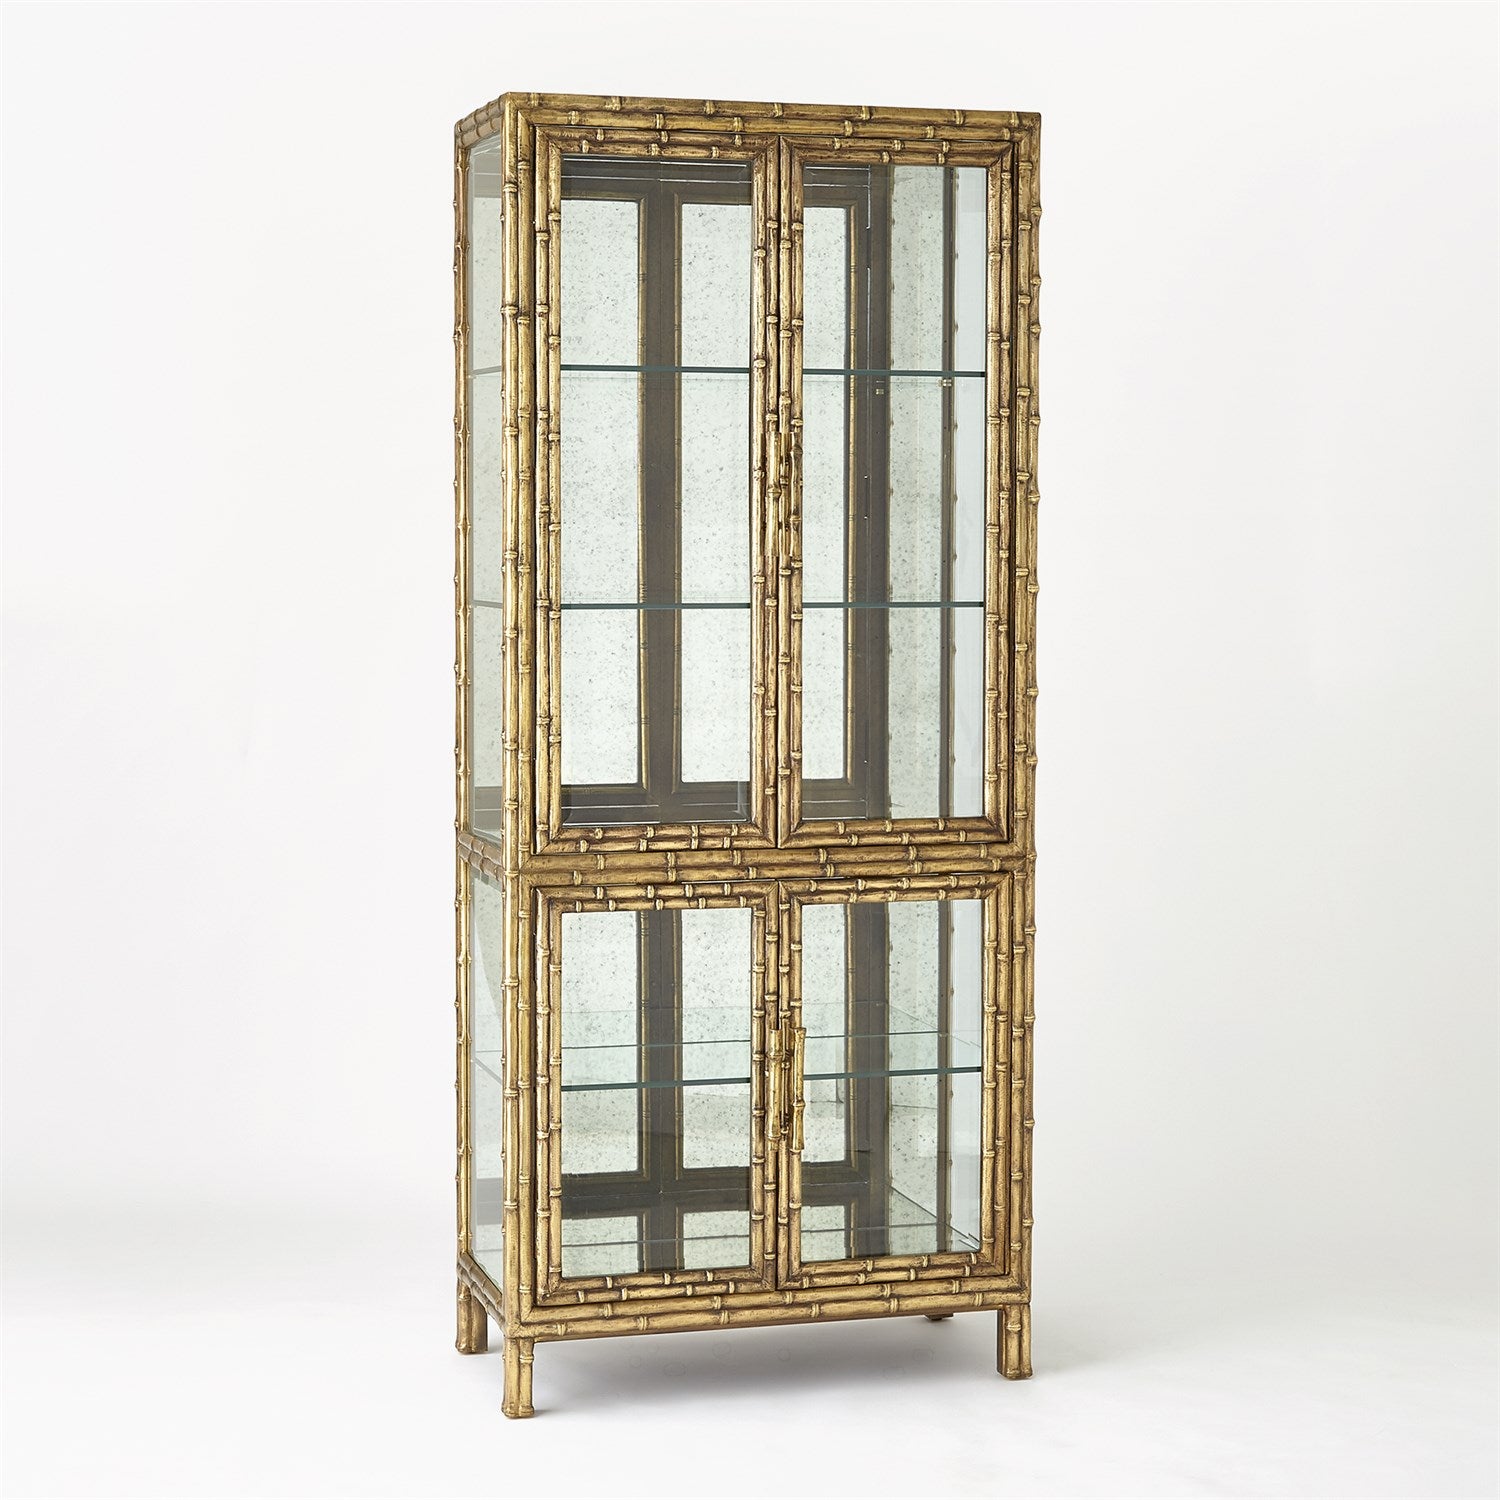 LUXURY IRON AND MIRROR DISPLAY CABENET FOR SALE, BRASS BAMBOO AND GLASS CABINET